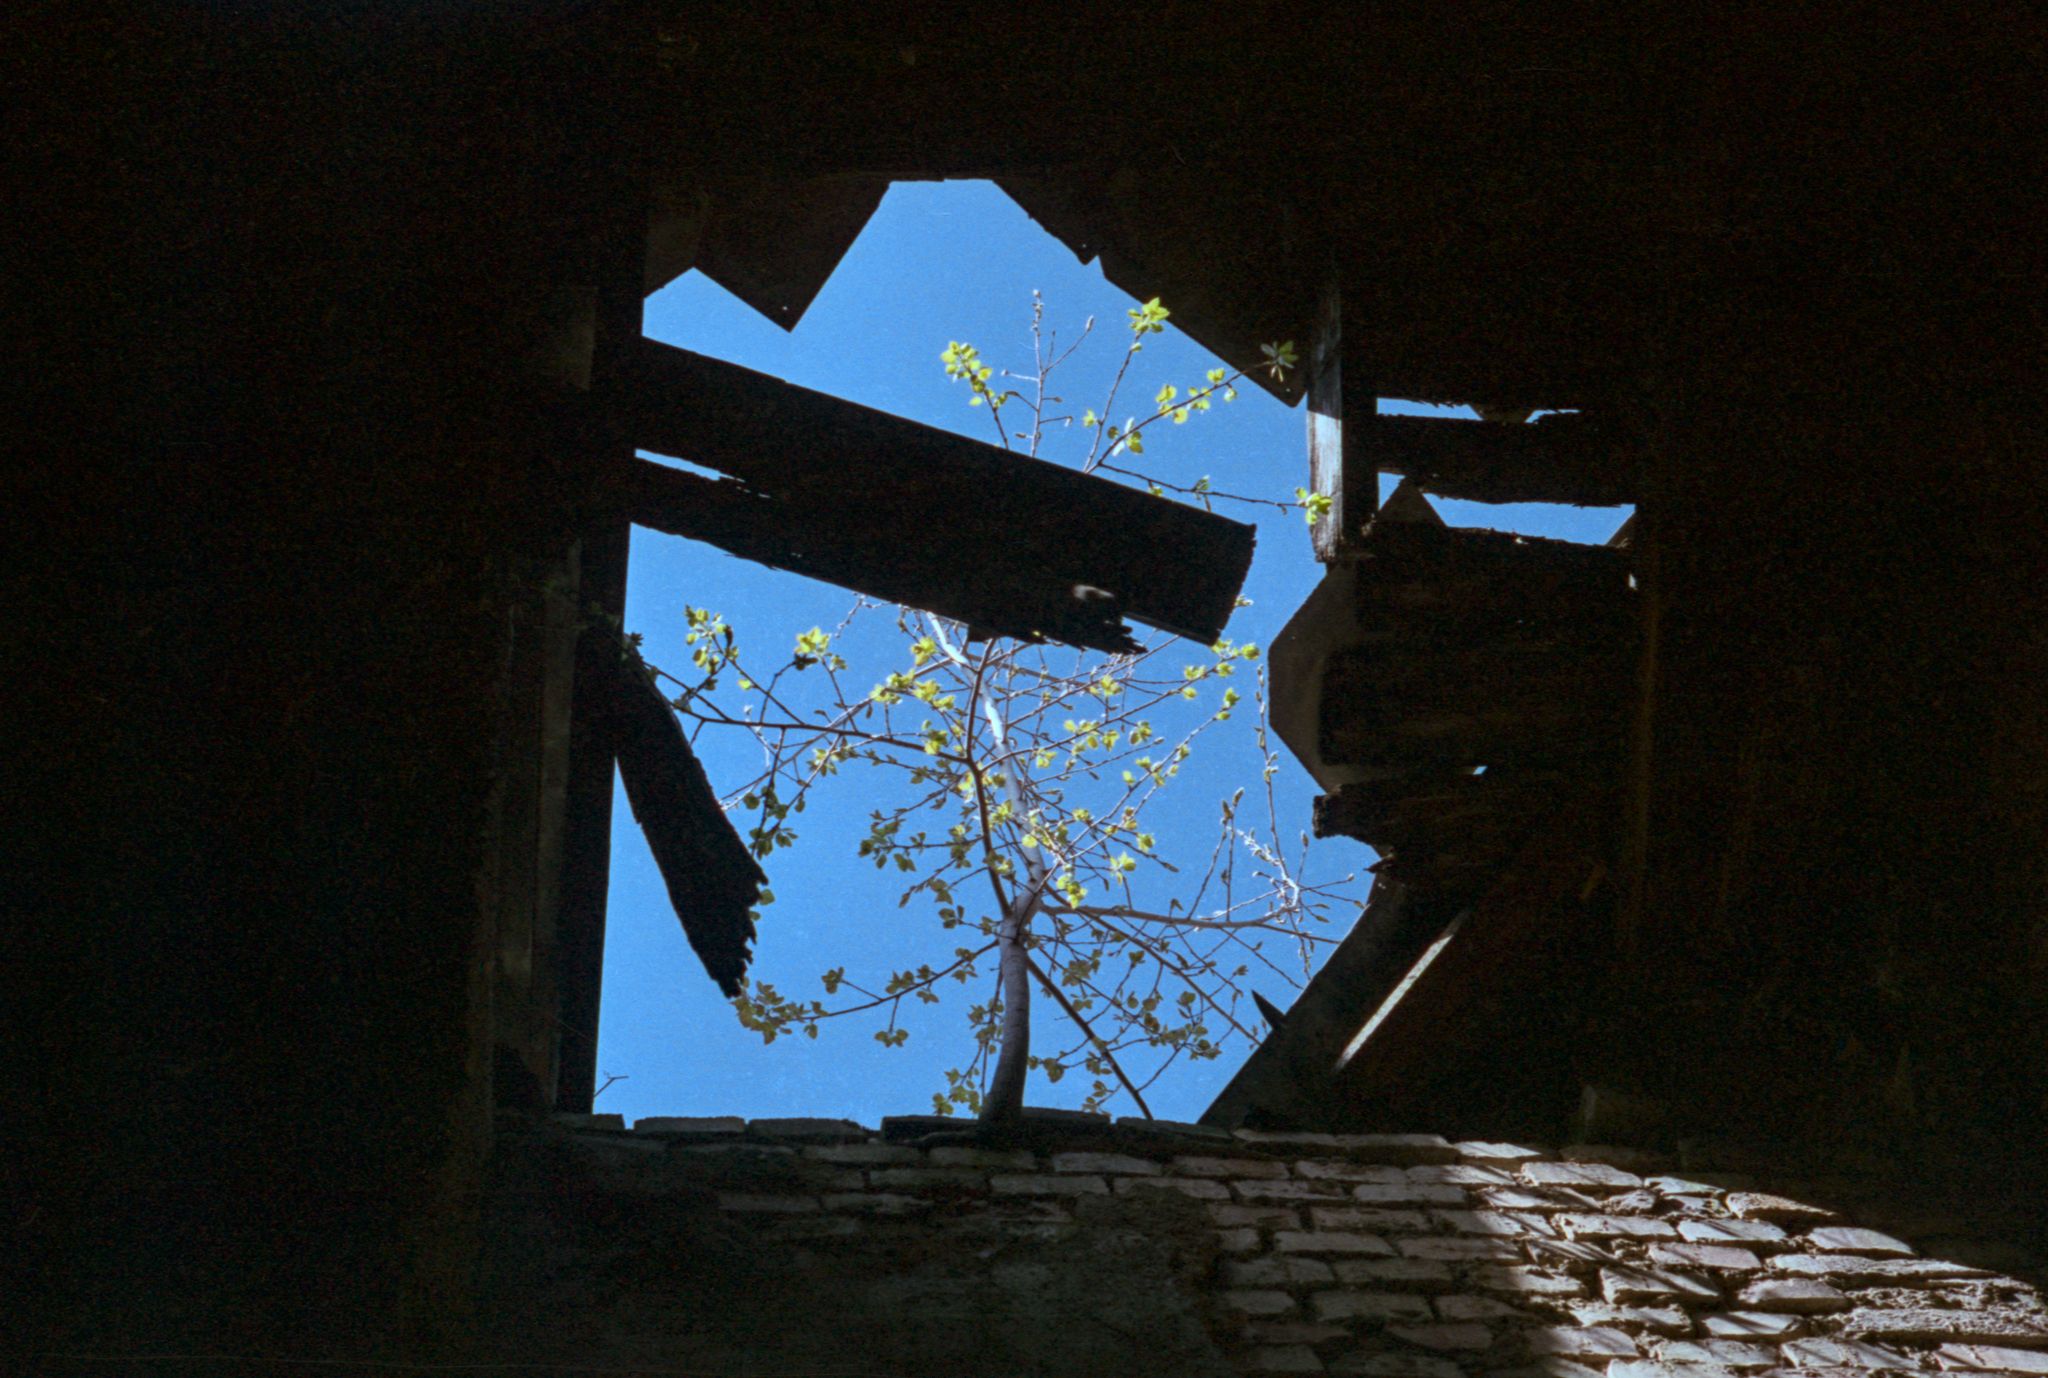 A rooftop window in a ruined train station